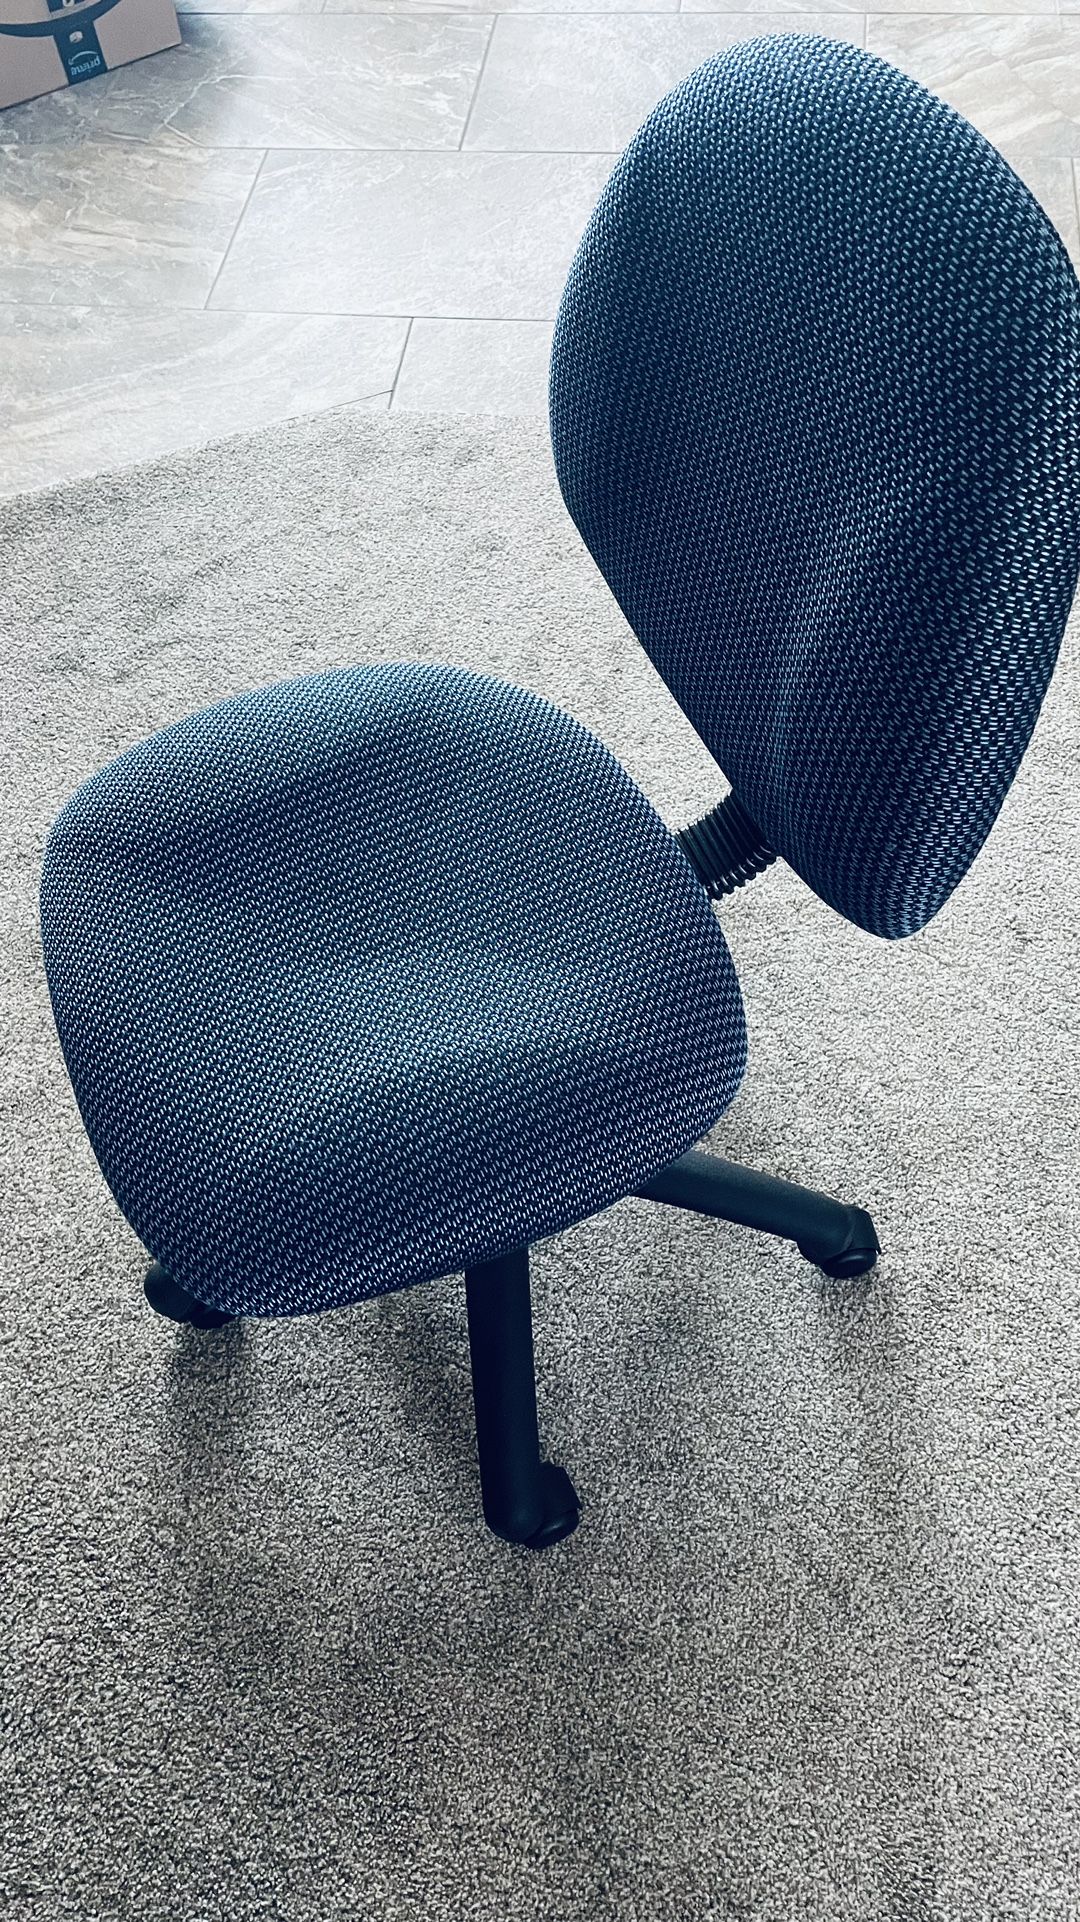 Computer Chair Value $110, Great Deal!